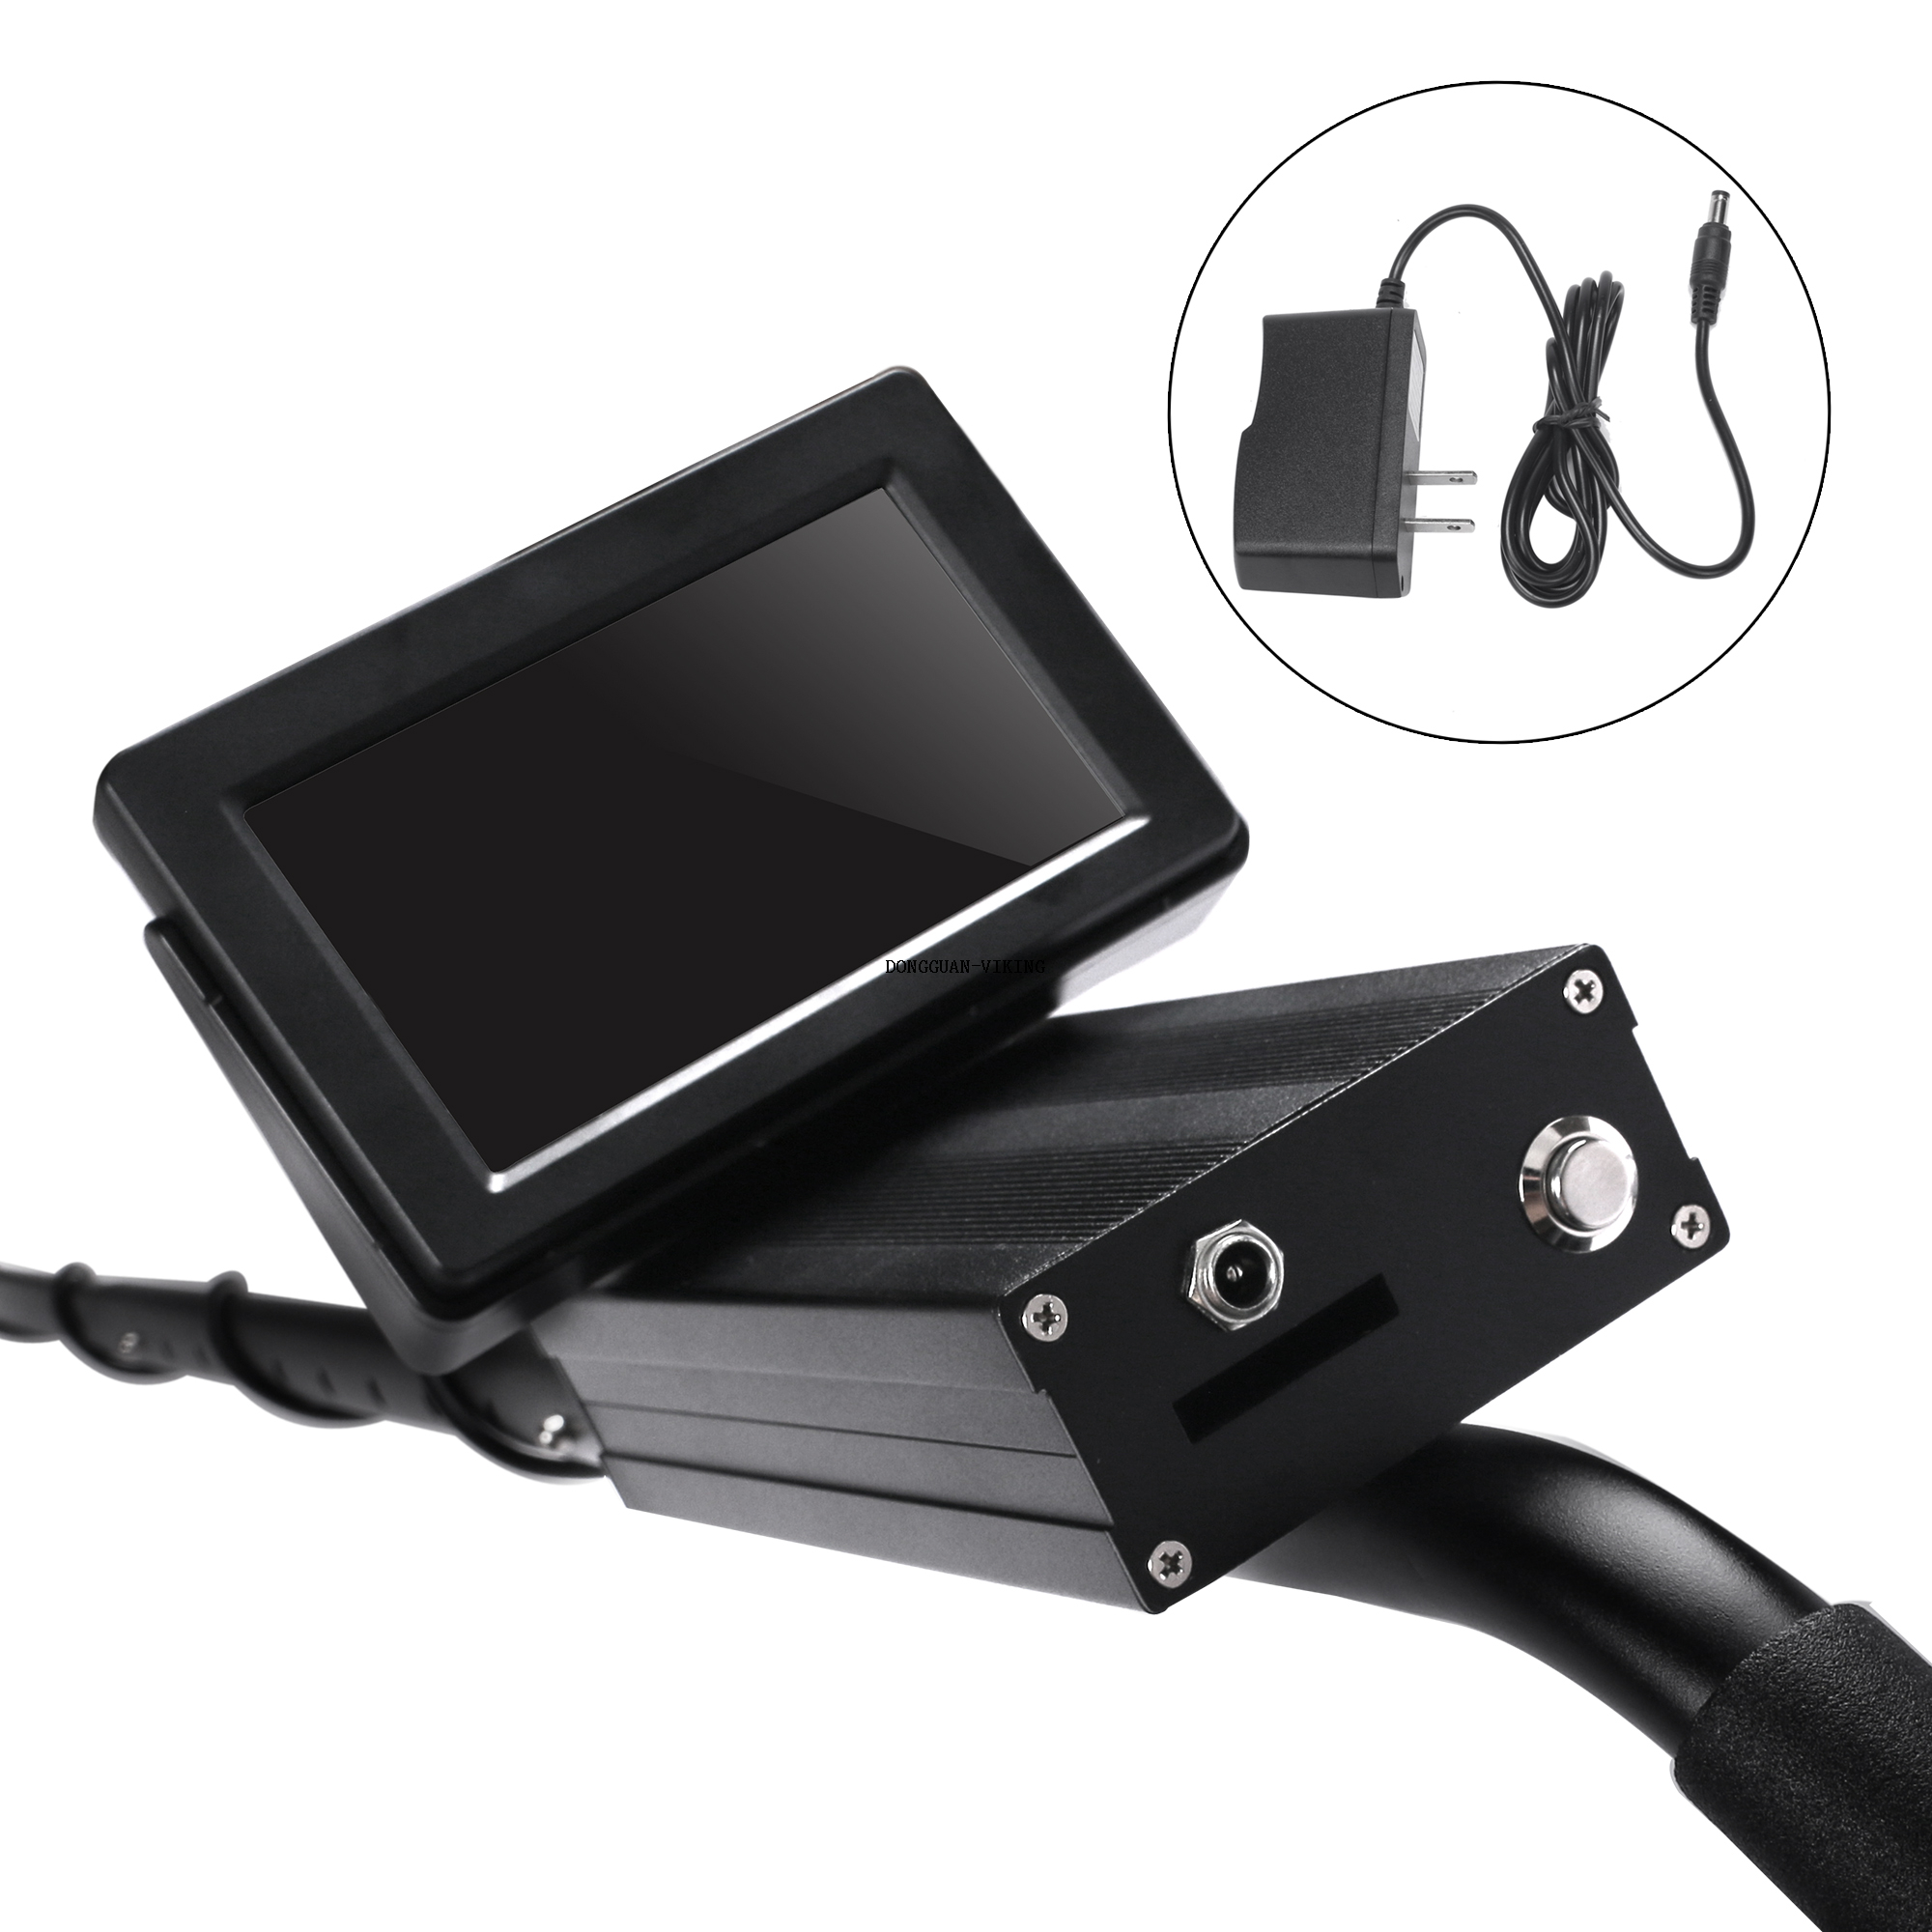 Portable under vehicle inspection camera